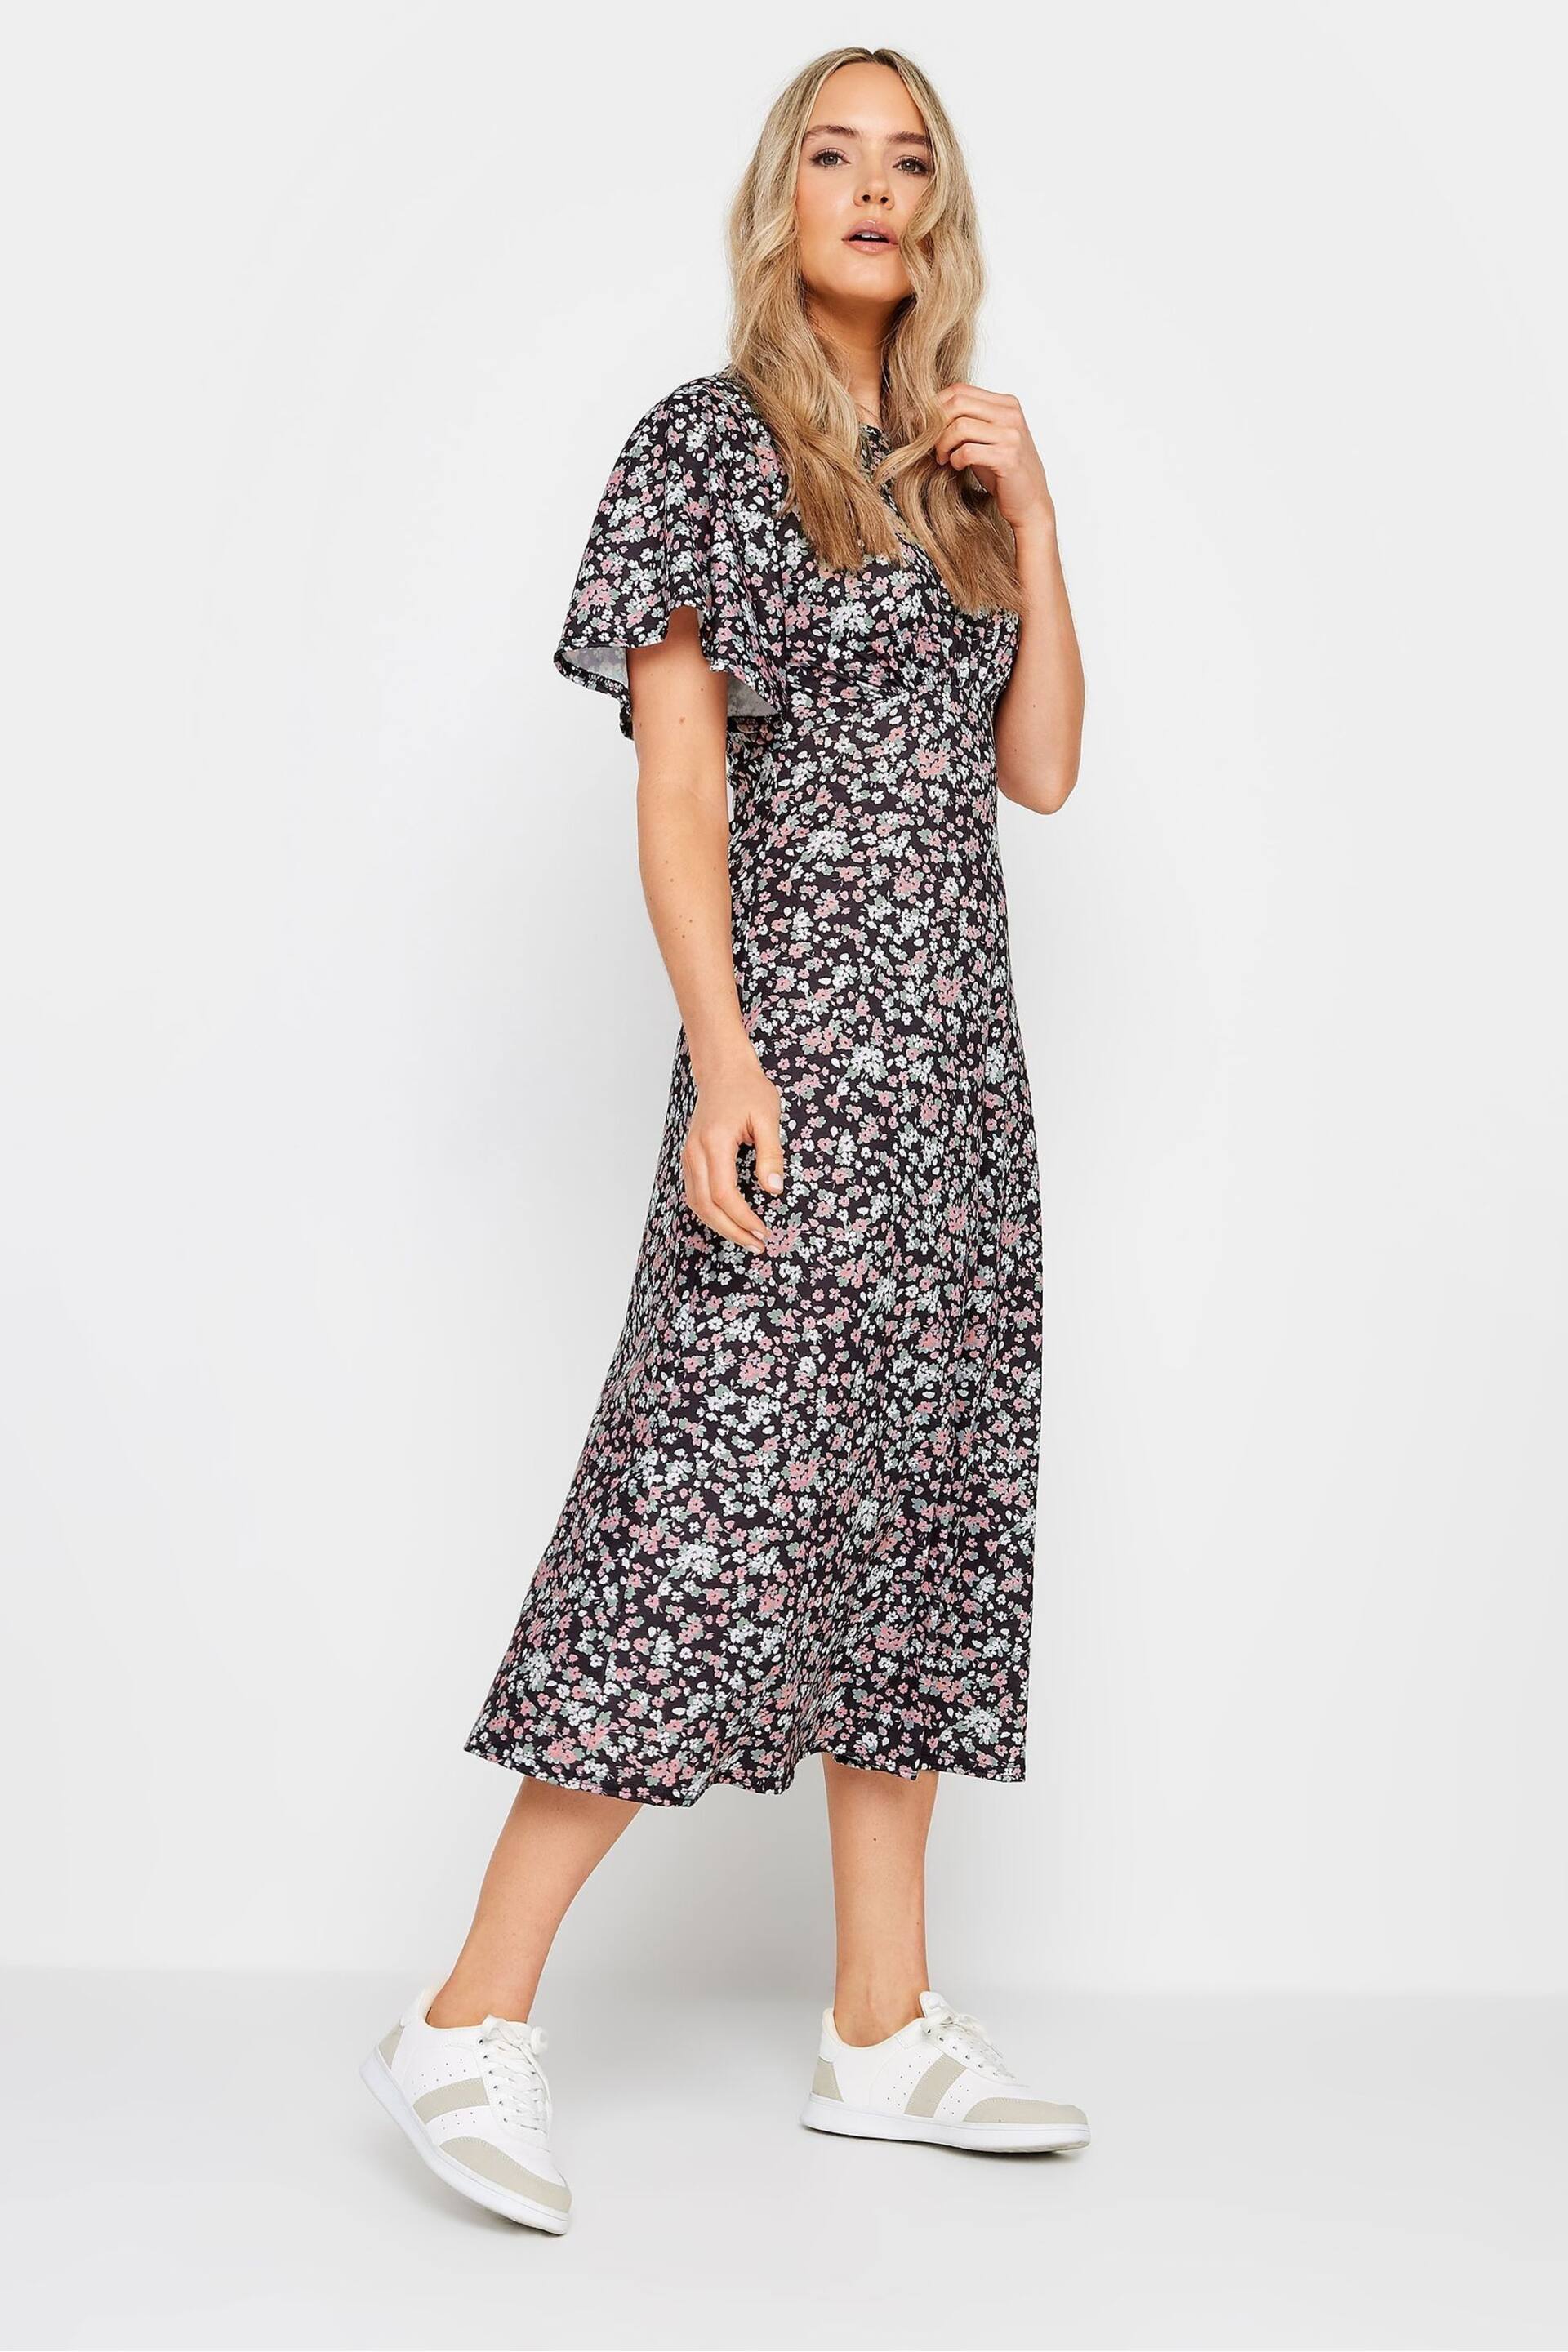 Long Tall Sally Multi Tall Ditsy Floral Midi Dress - Image 2 of 5